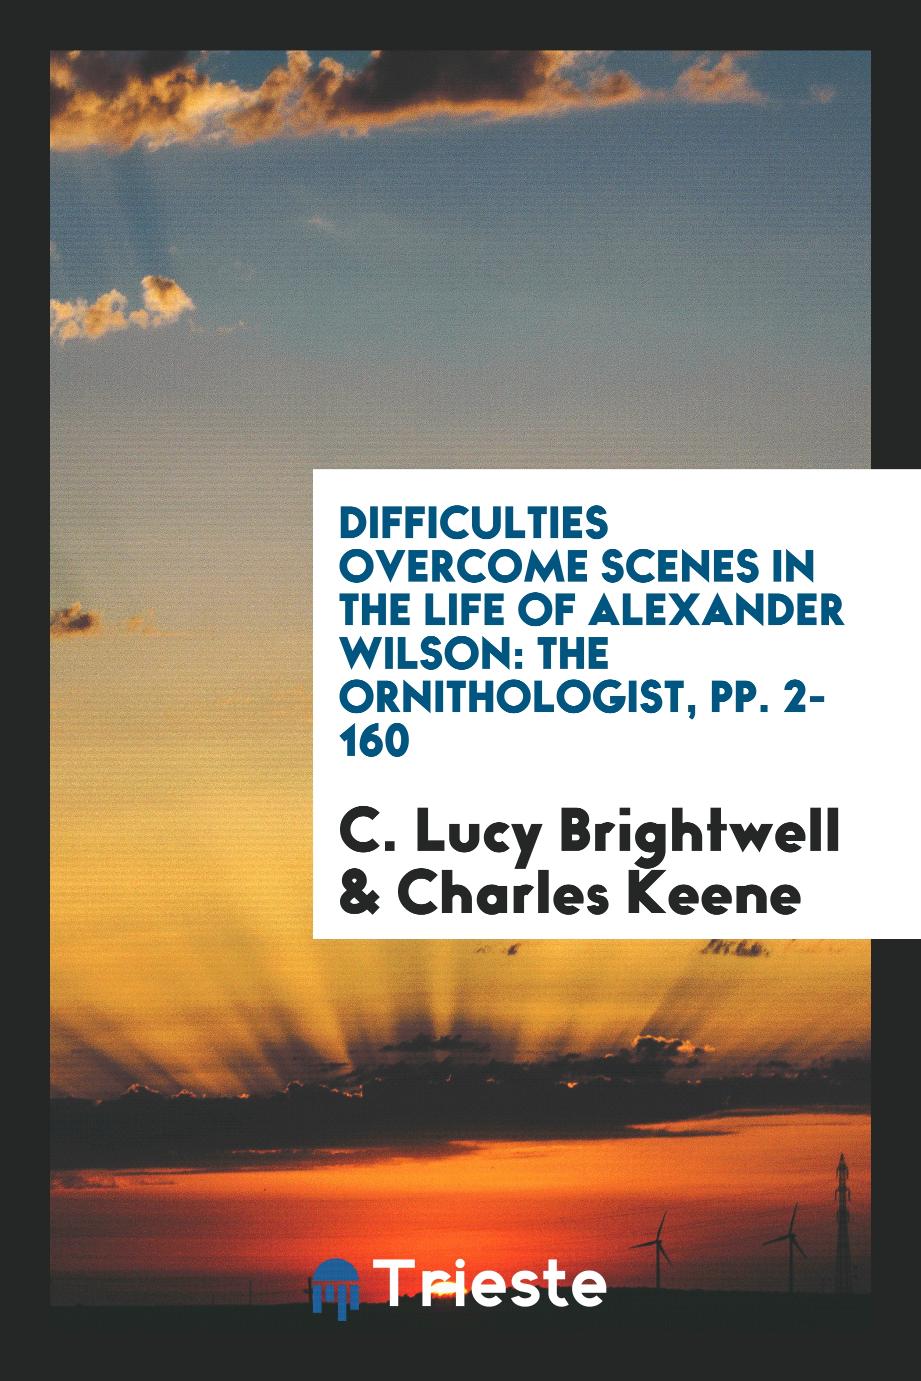 C. Lucy Brightwell, Charles Keene - Difficulties Overcome Scenes in the Life of Alexander Wilson: The Ornithologist, pp. 2-160